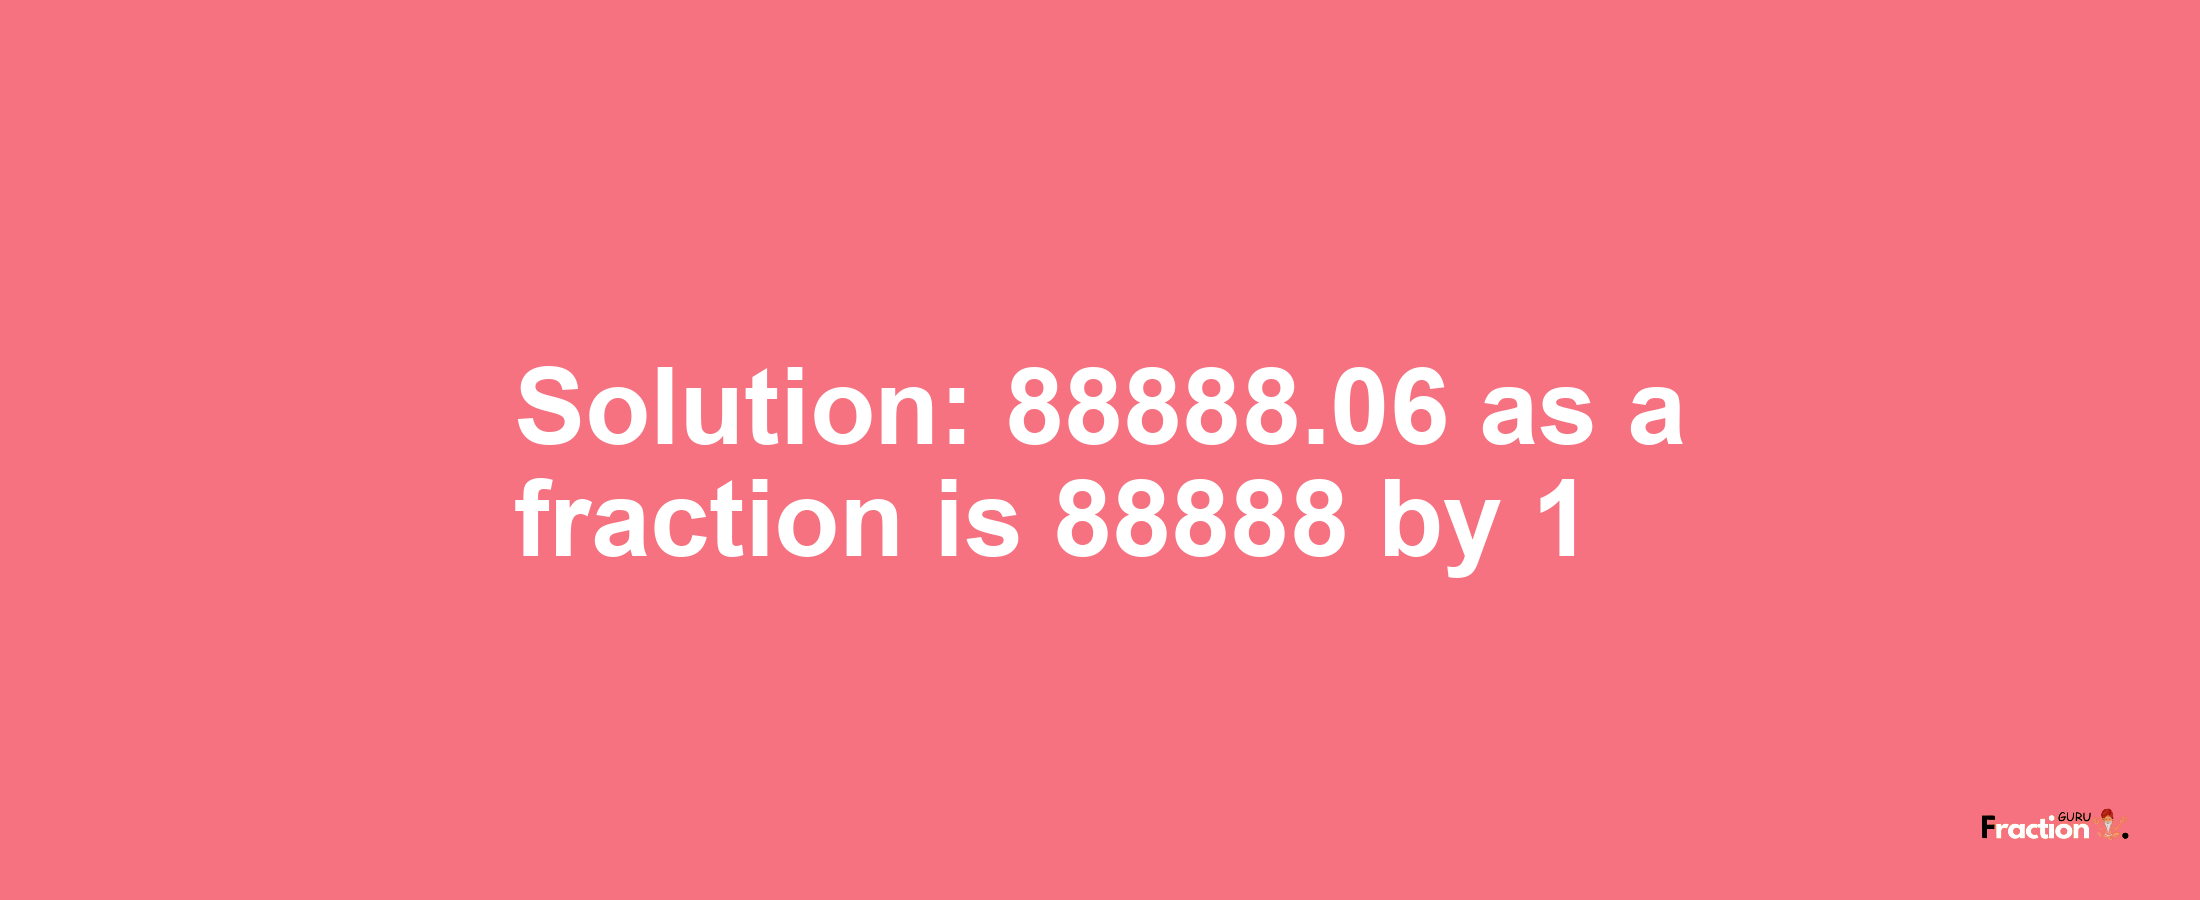 Solution:88888.06 as a fraction is 88888/1